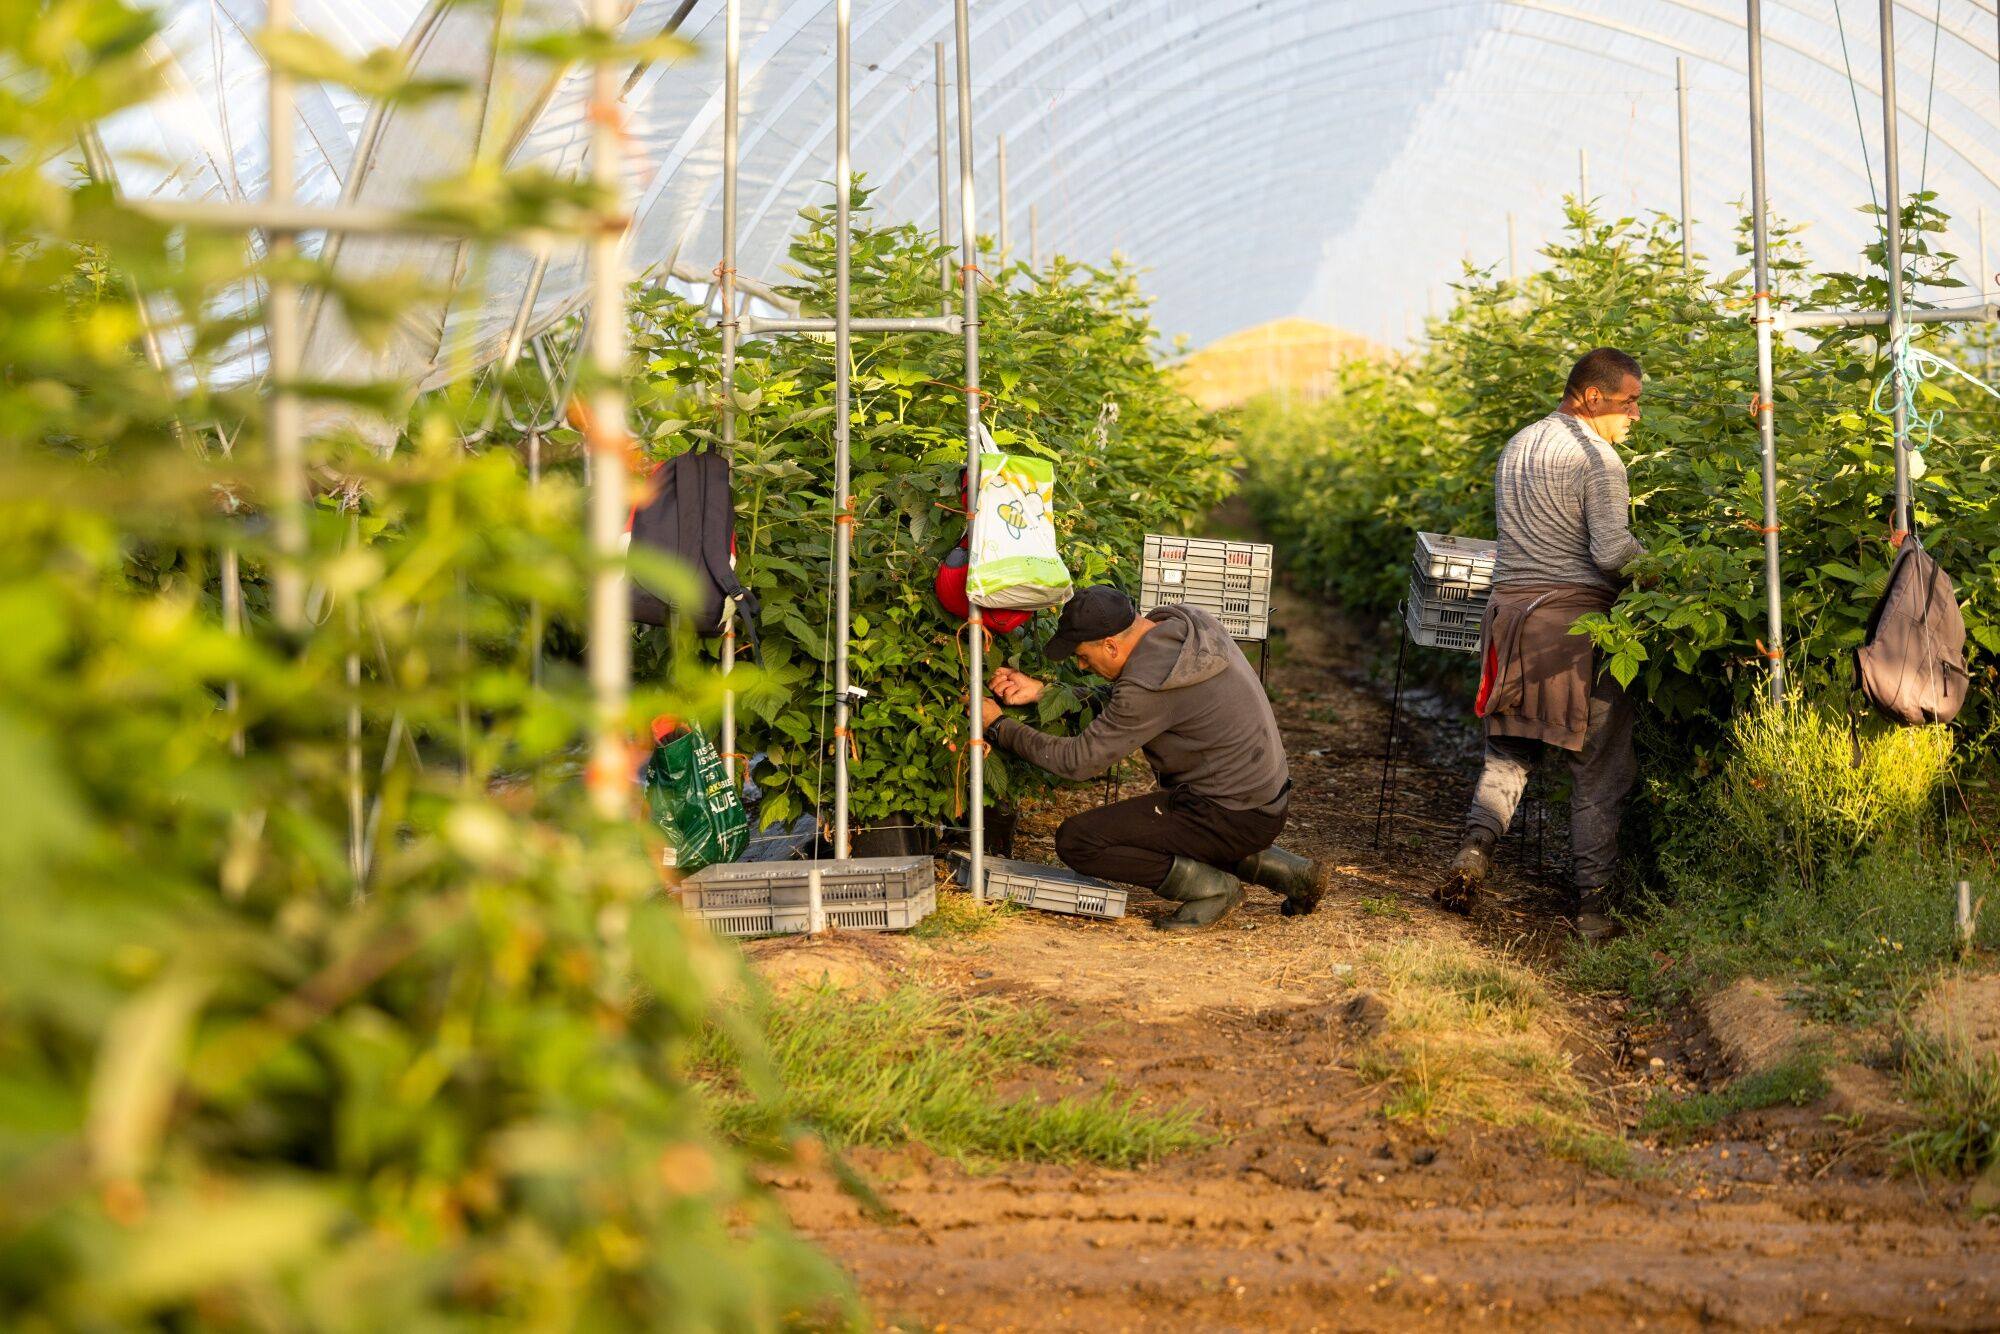 Britain granted more than 35,000 seasonal worker visas in the 12 months up to March, a rise of 10 per cent on the previous year. Photo: Bloomberg